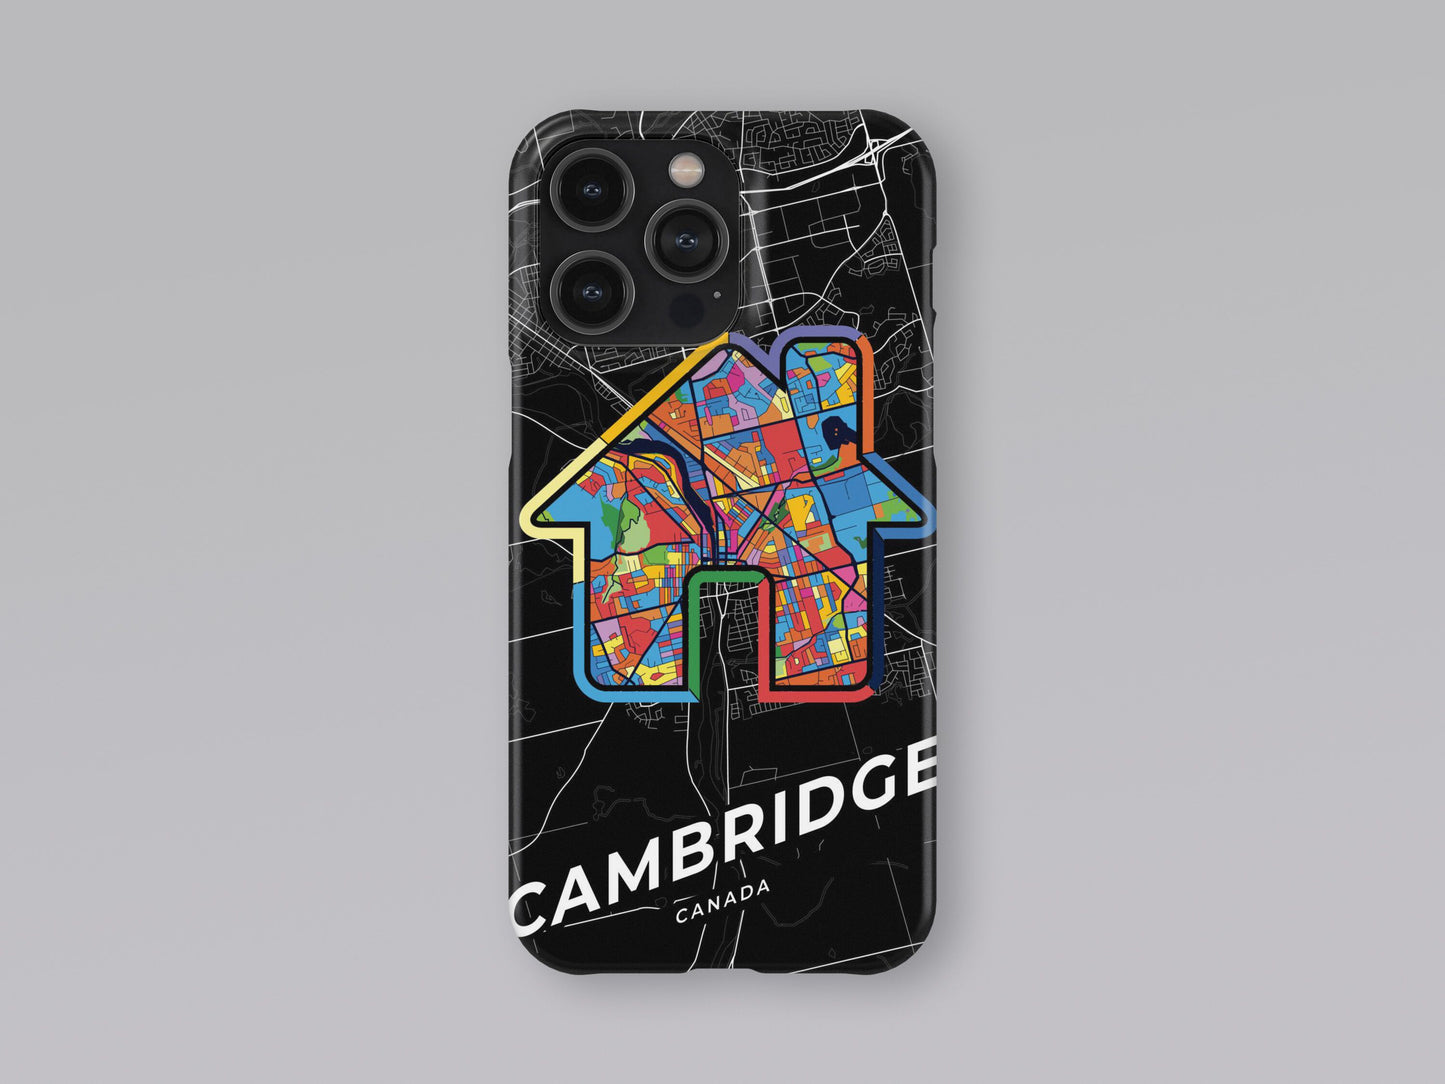 Cambridge Canada slim phone case with colorful icon. Birthday, wedding or housewarming gift. Couple match cases. 3